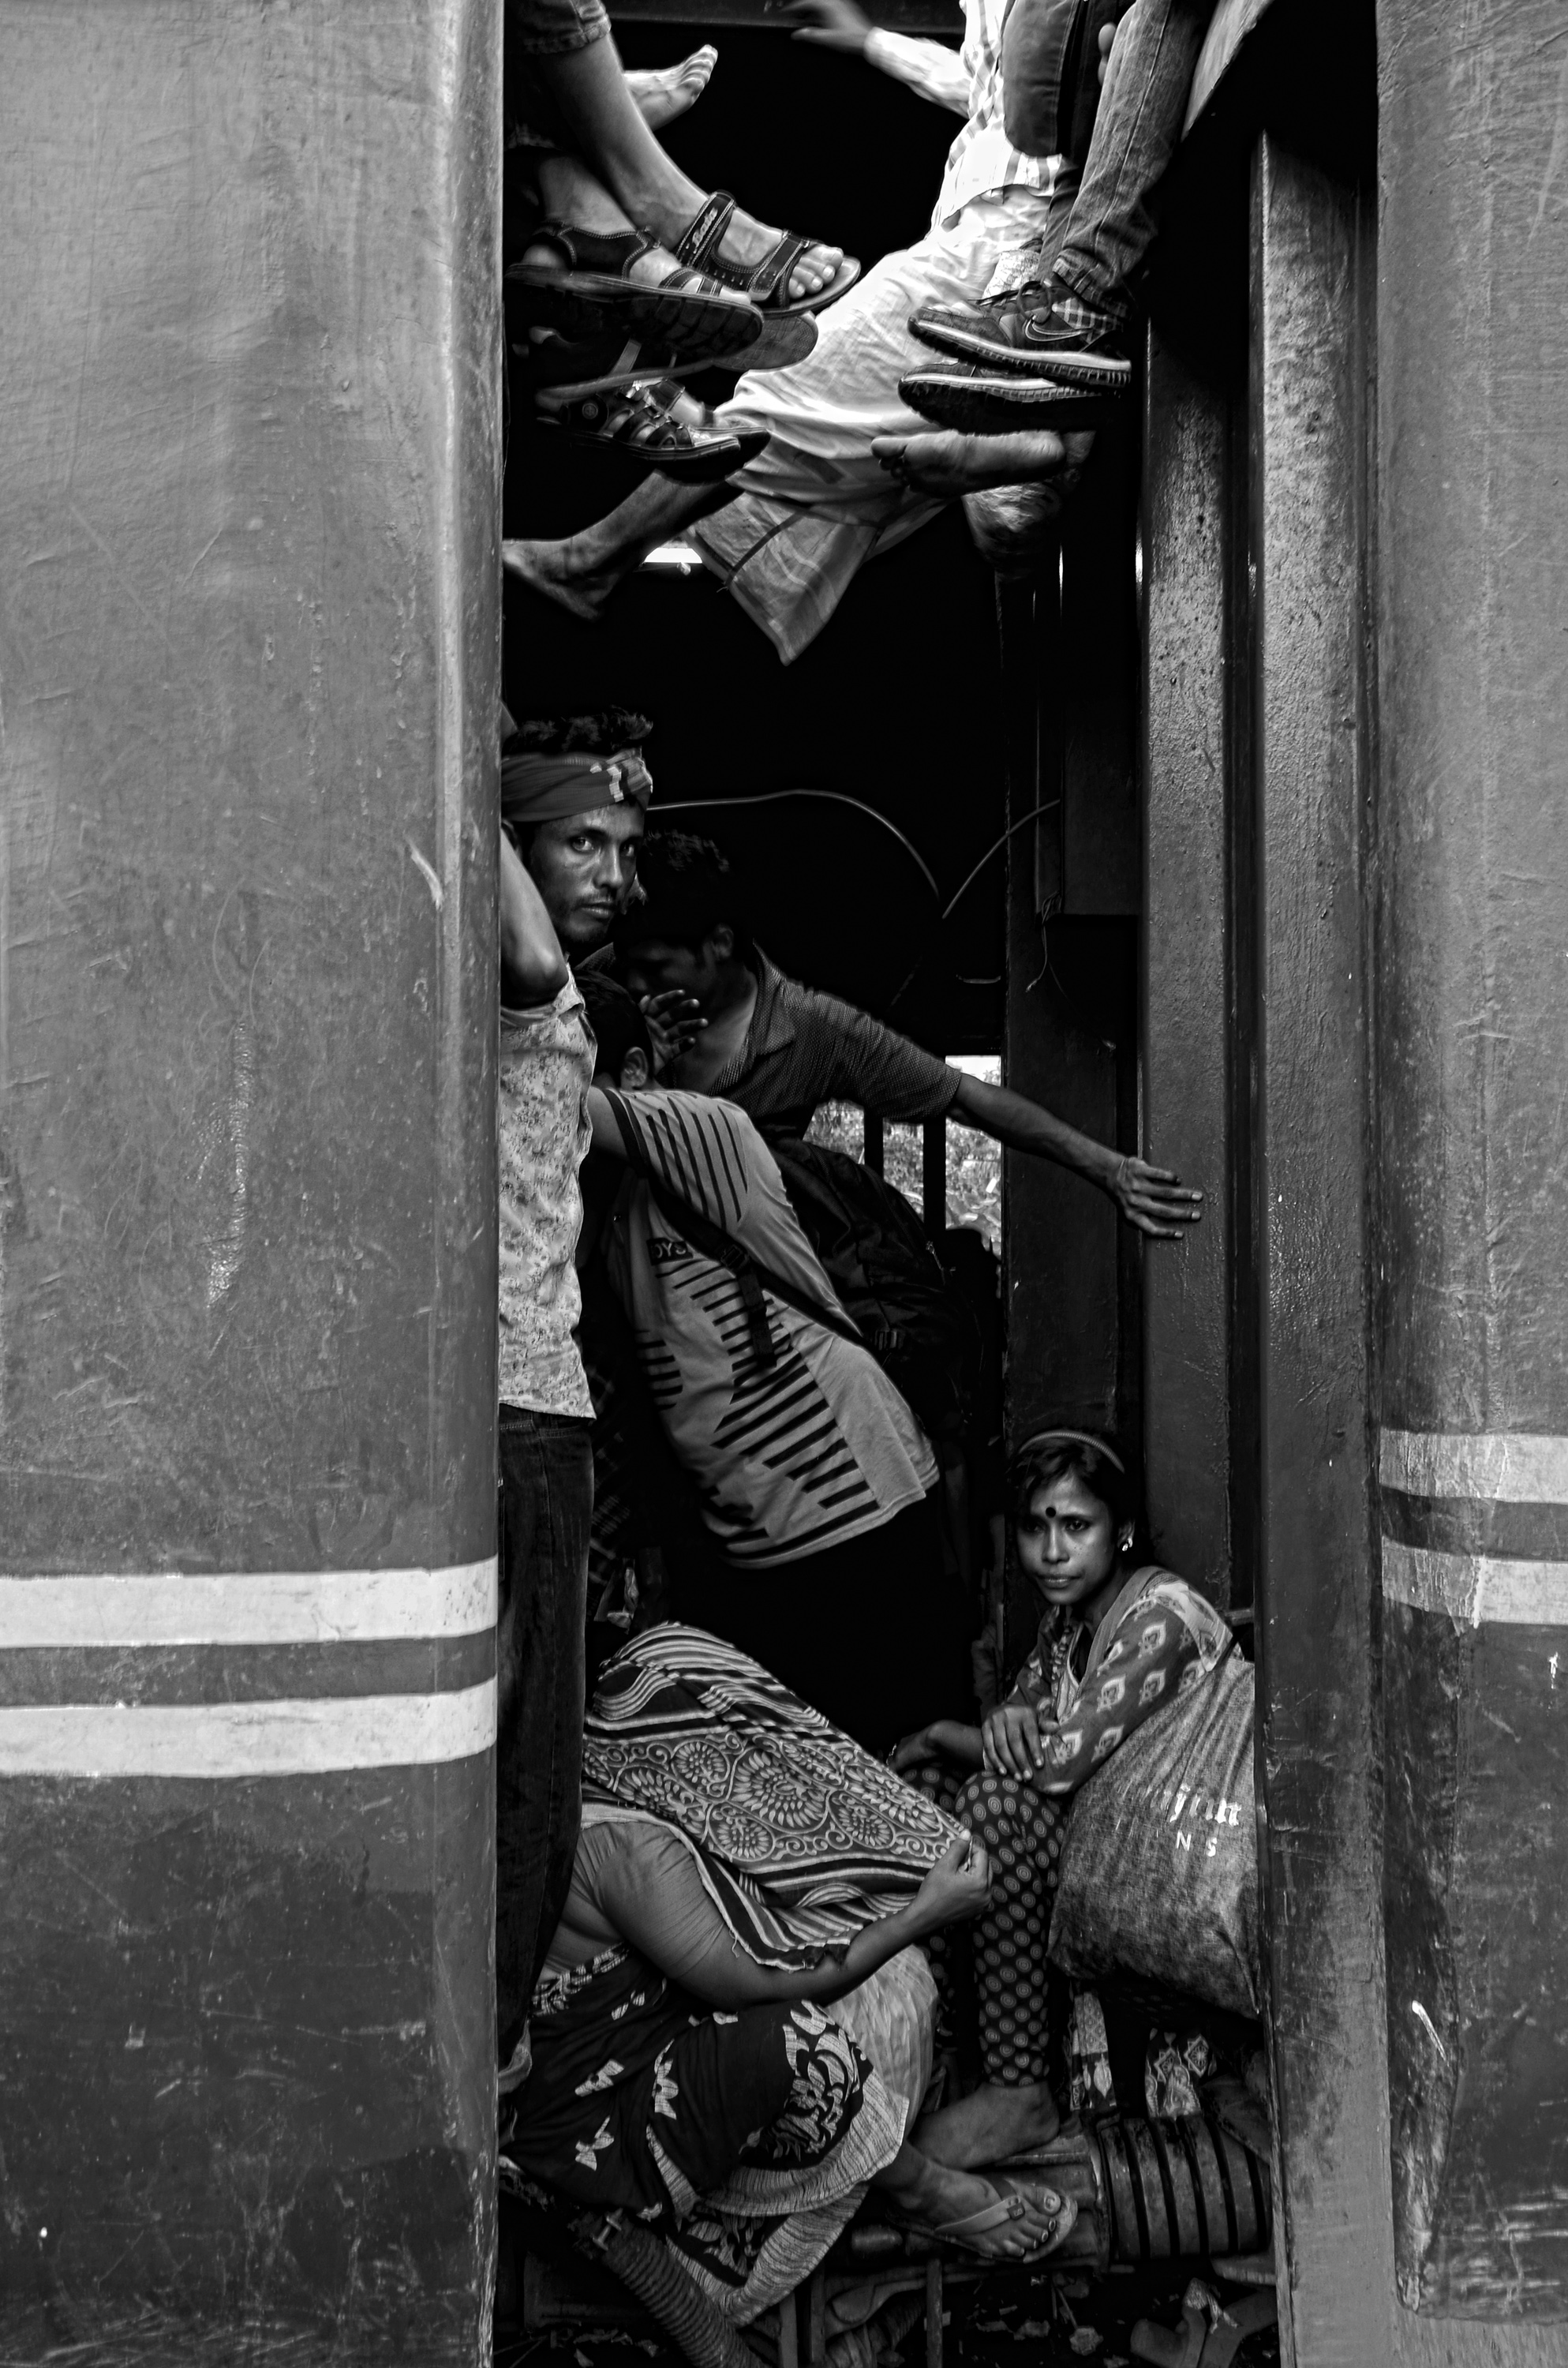 Some passengers trying to by seating between two bogies of train in the platform, they want to reach their home at any cost for celebrating the biggest festival Eid.